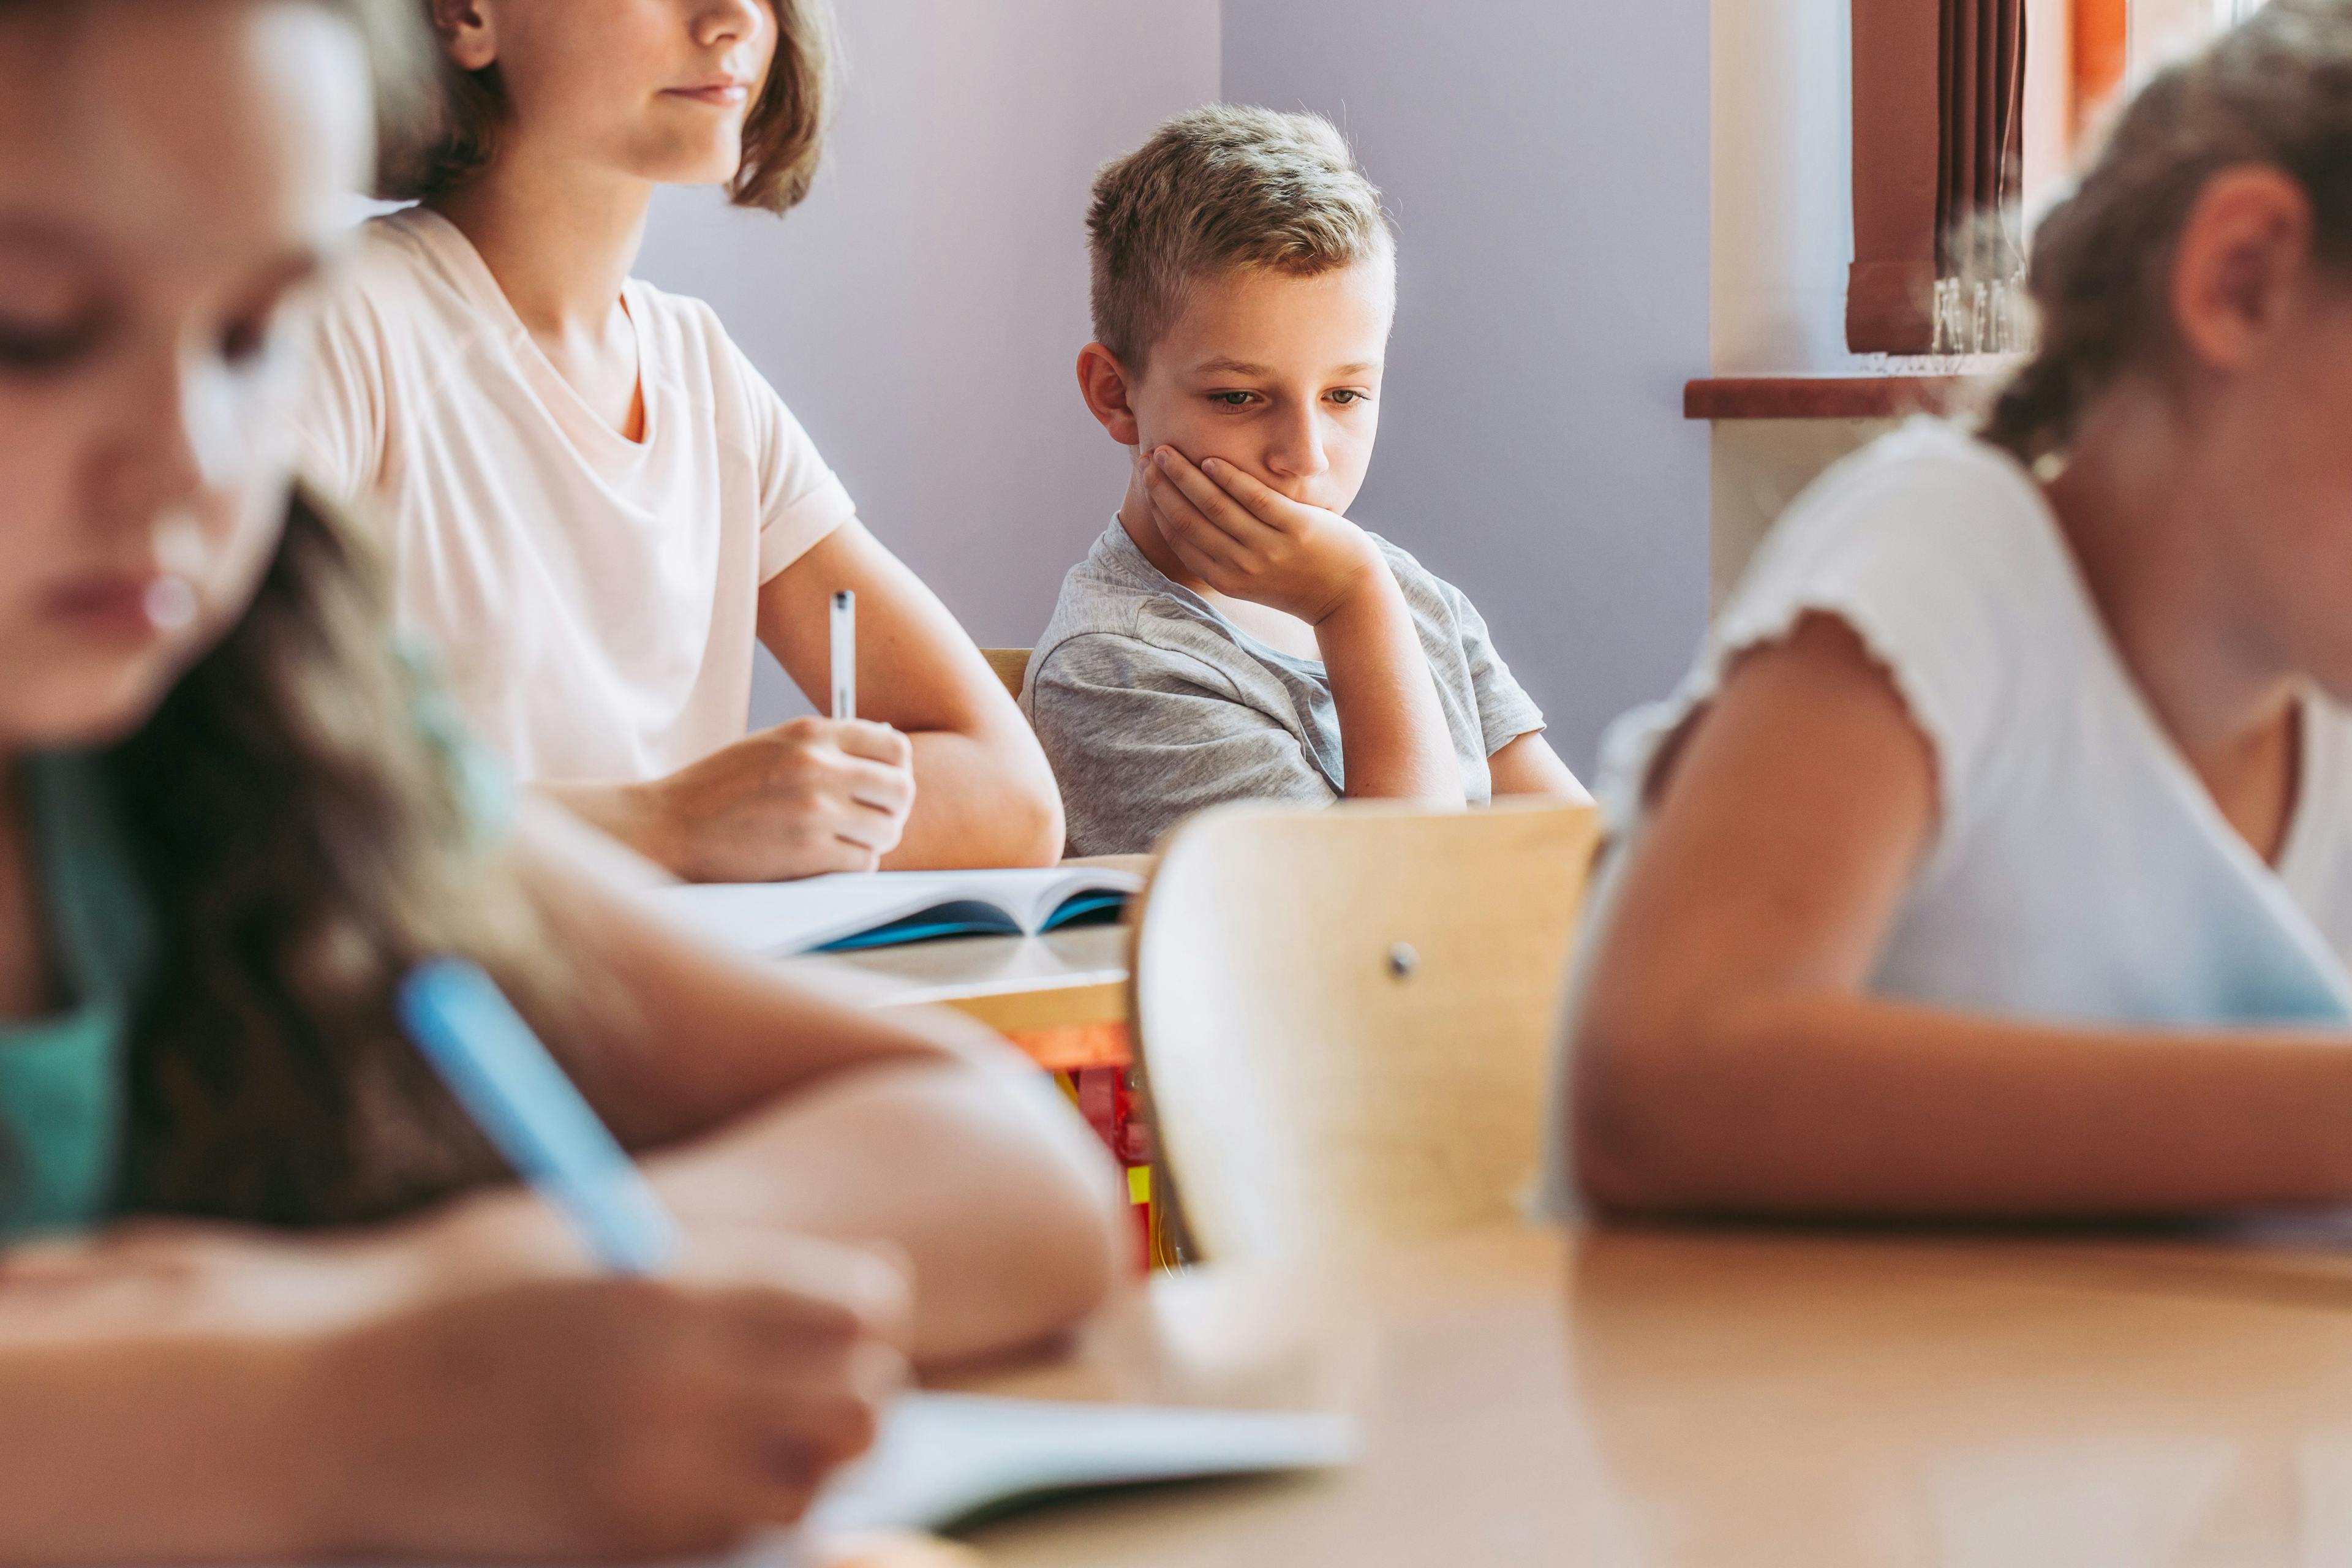 Government aims to streamline Medicaid billing for students with disabilities, expand health care services in schools | Image Credit: © Photographee.eu - © Photographee.eu - stock.adobe.com.